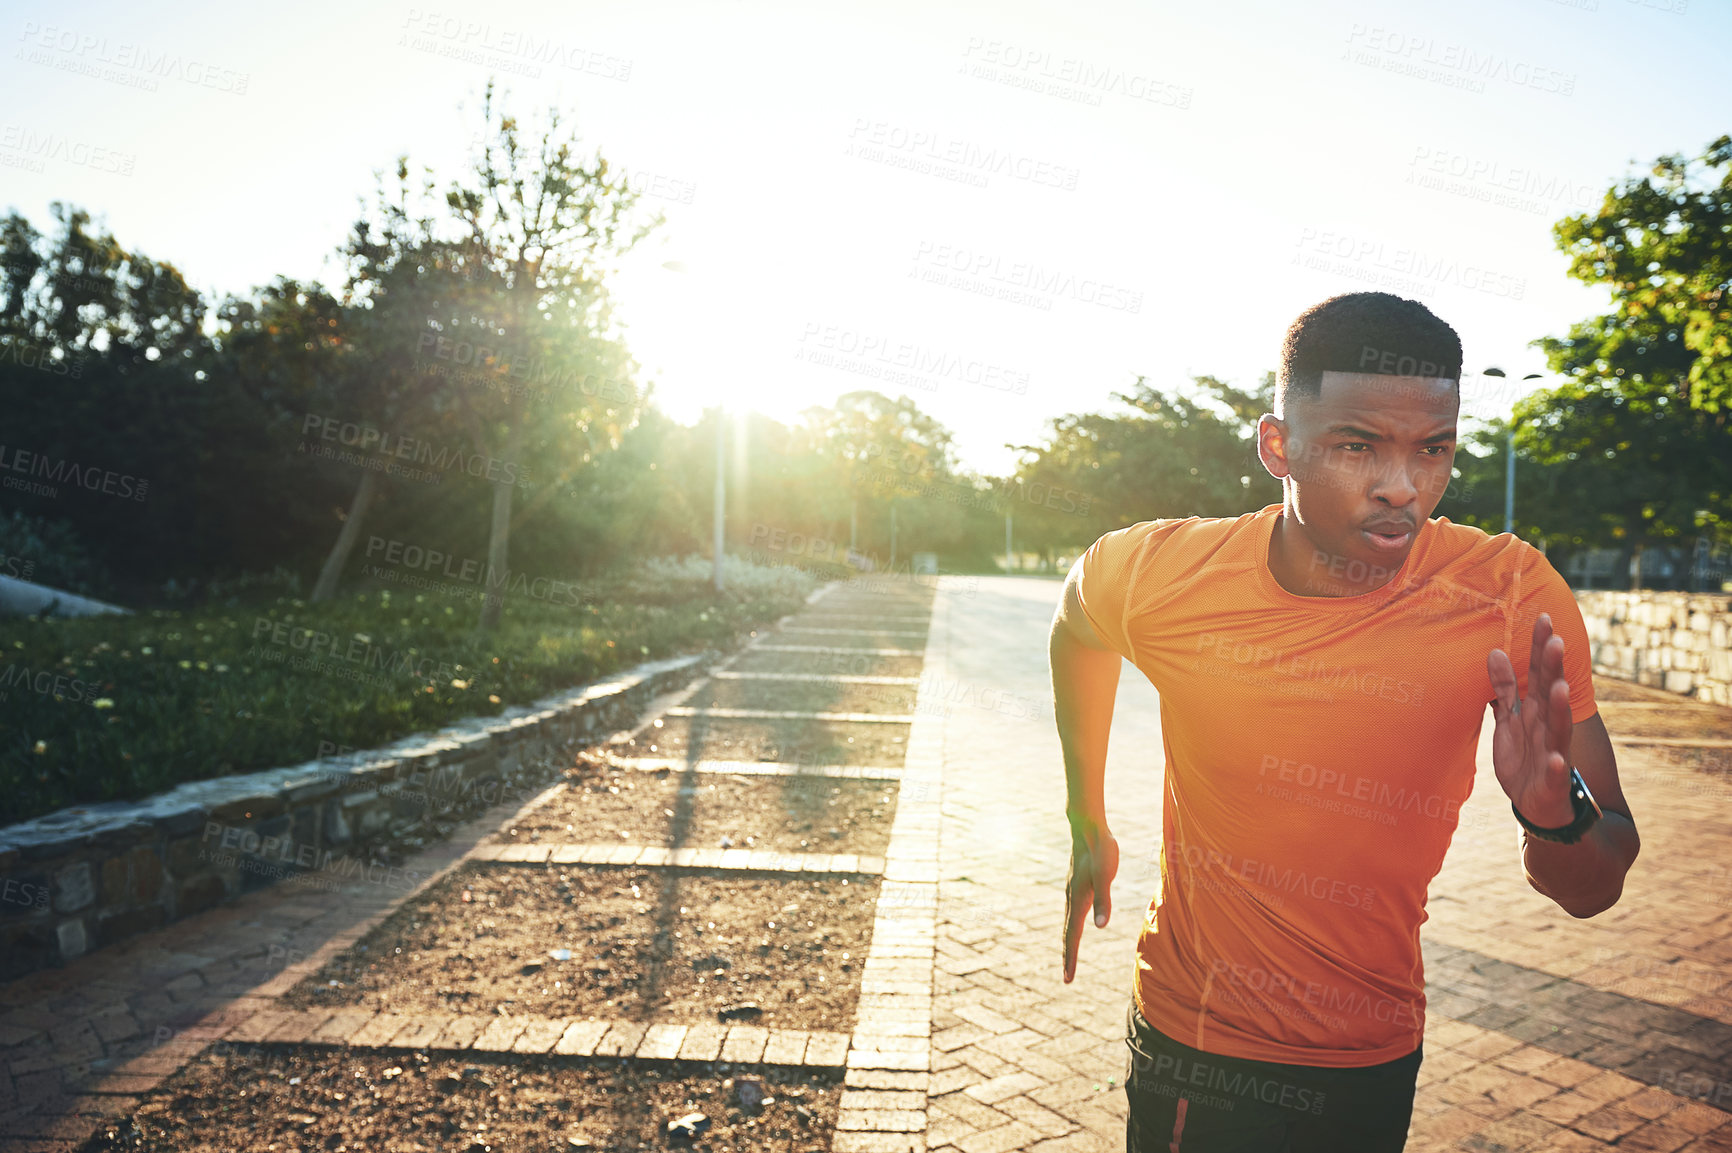 Buy stock photo Cropped shot of a young man out for a run